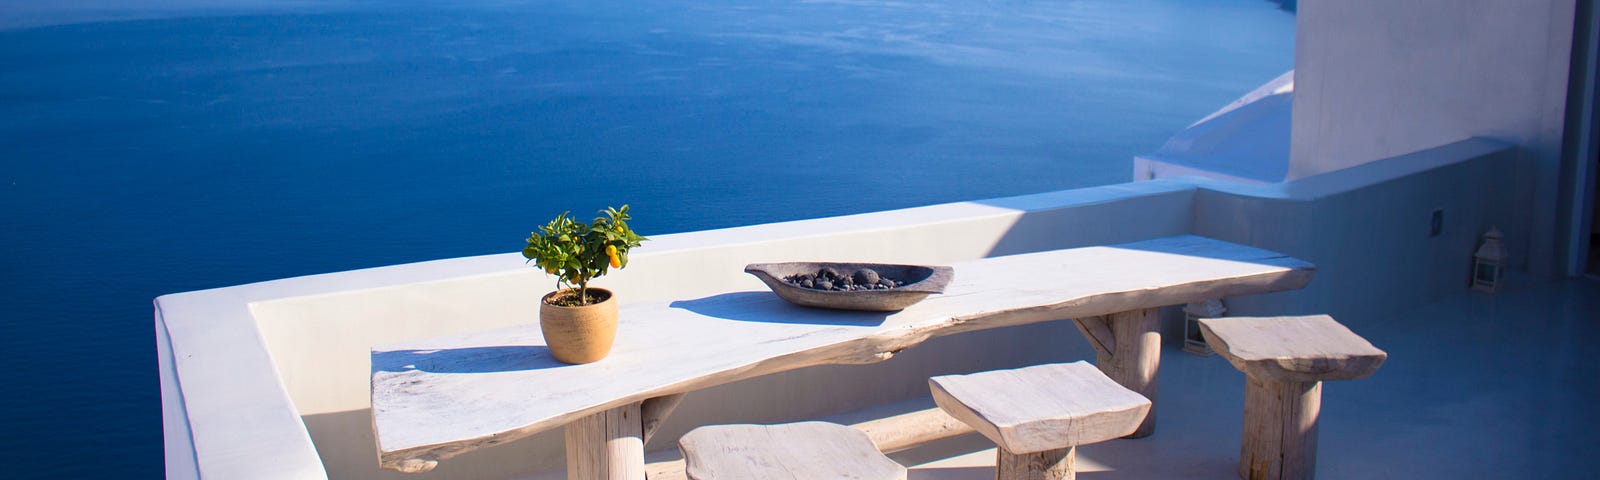 Sea view from a terrace in Greece